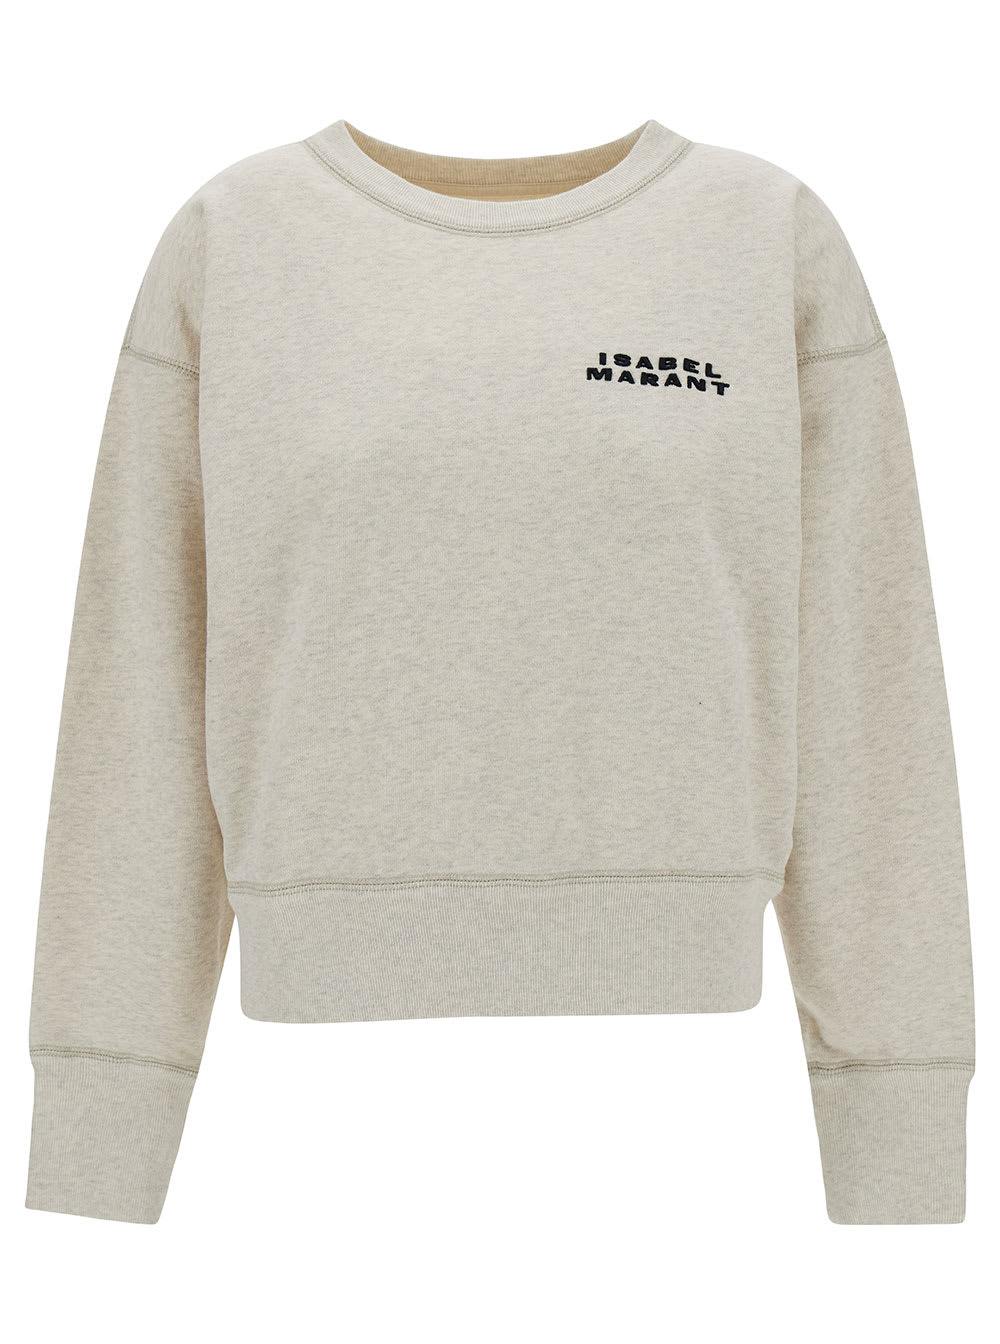 Isabel Marant Beige Cropped Sweatshirt With Contrasting Logo Embroidery In Cotton Blend Woman